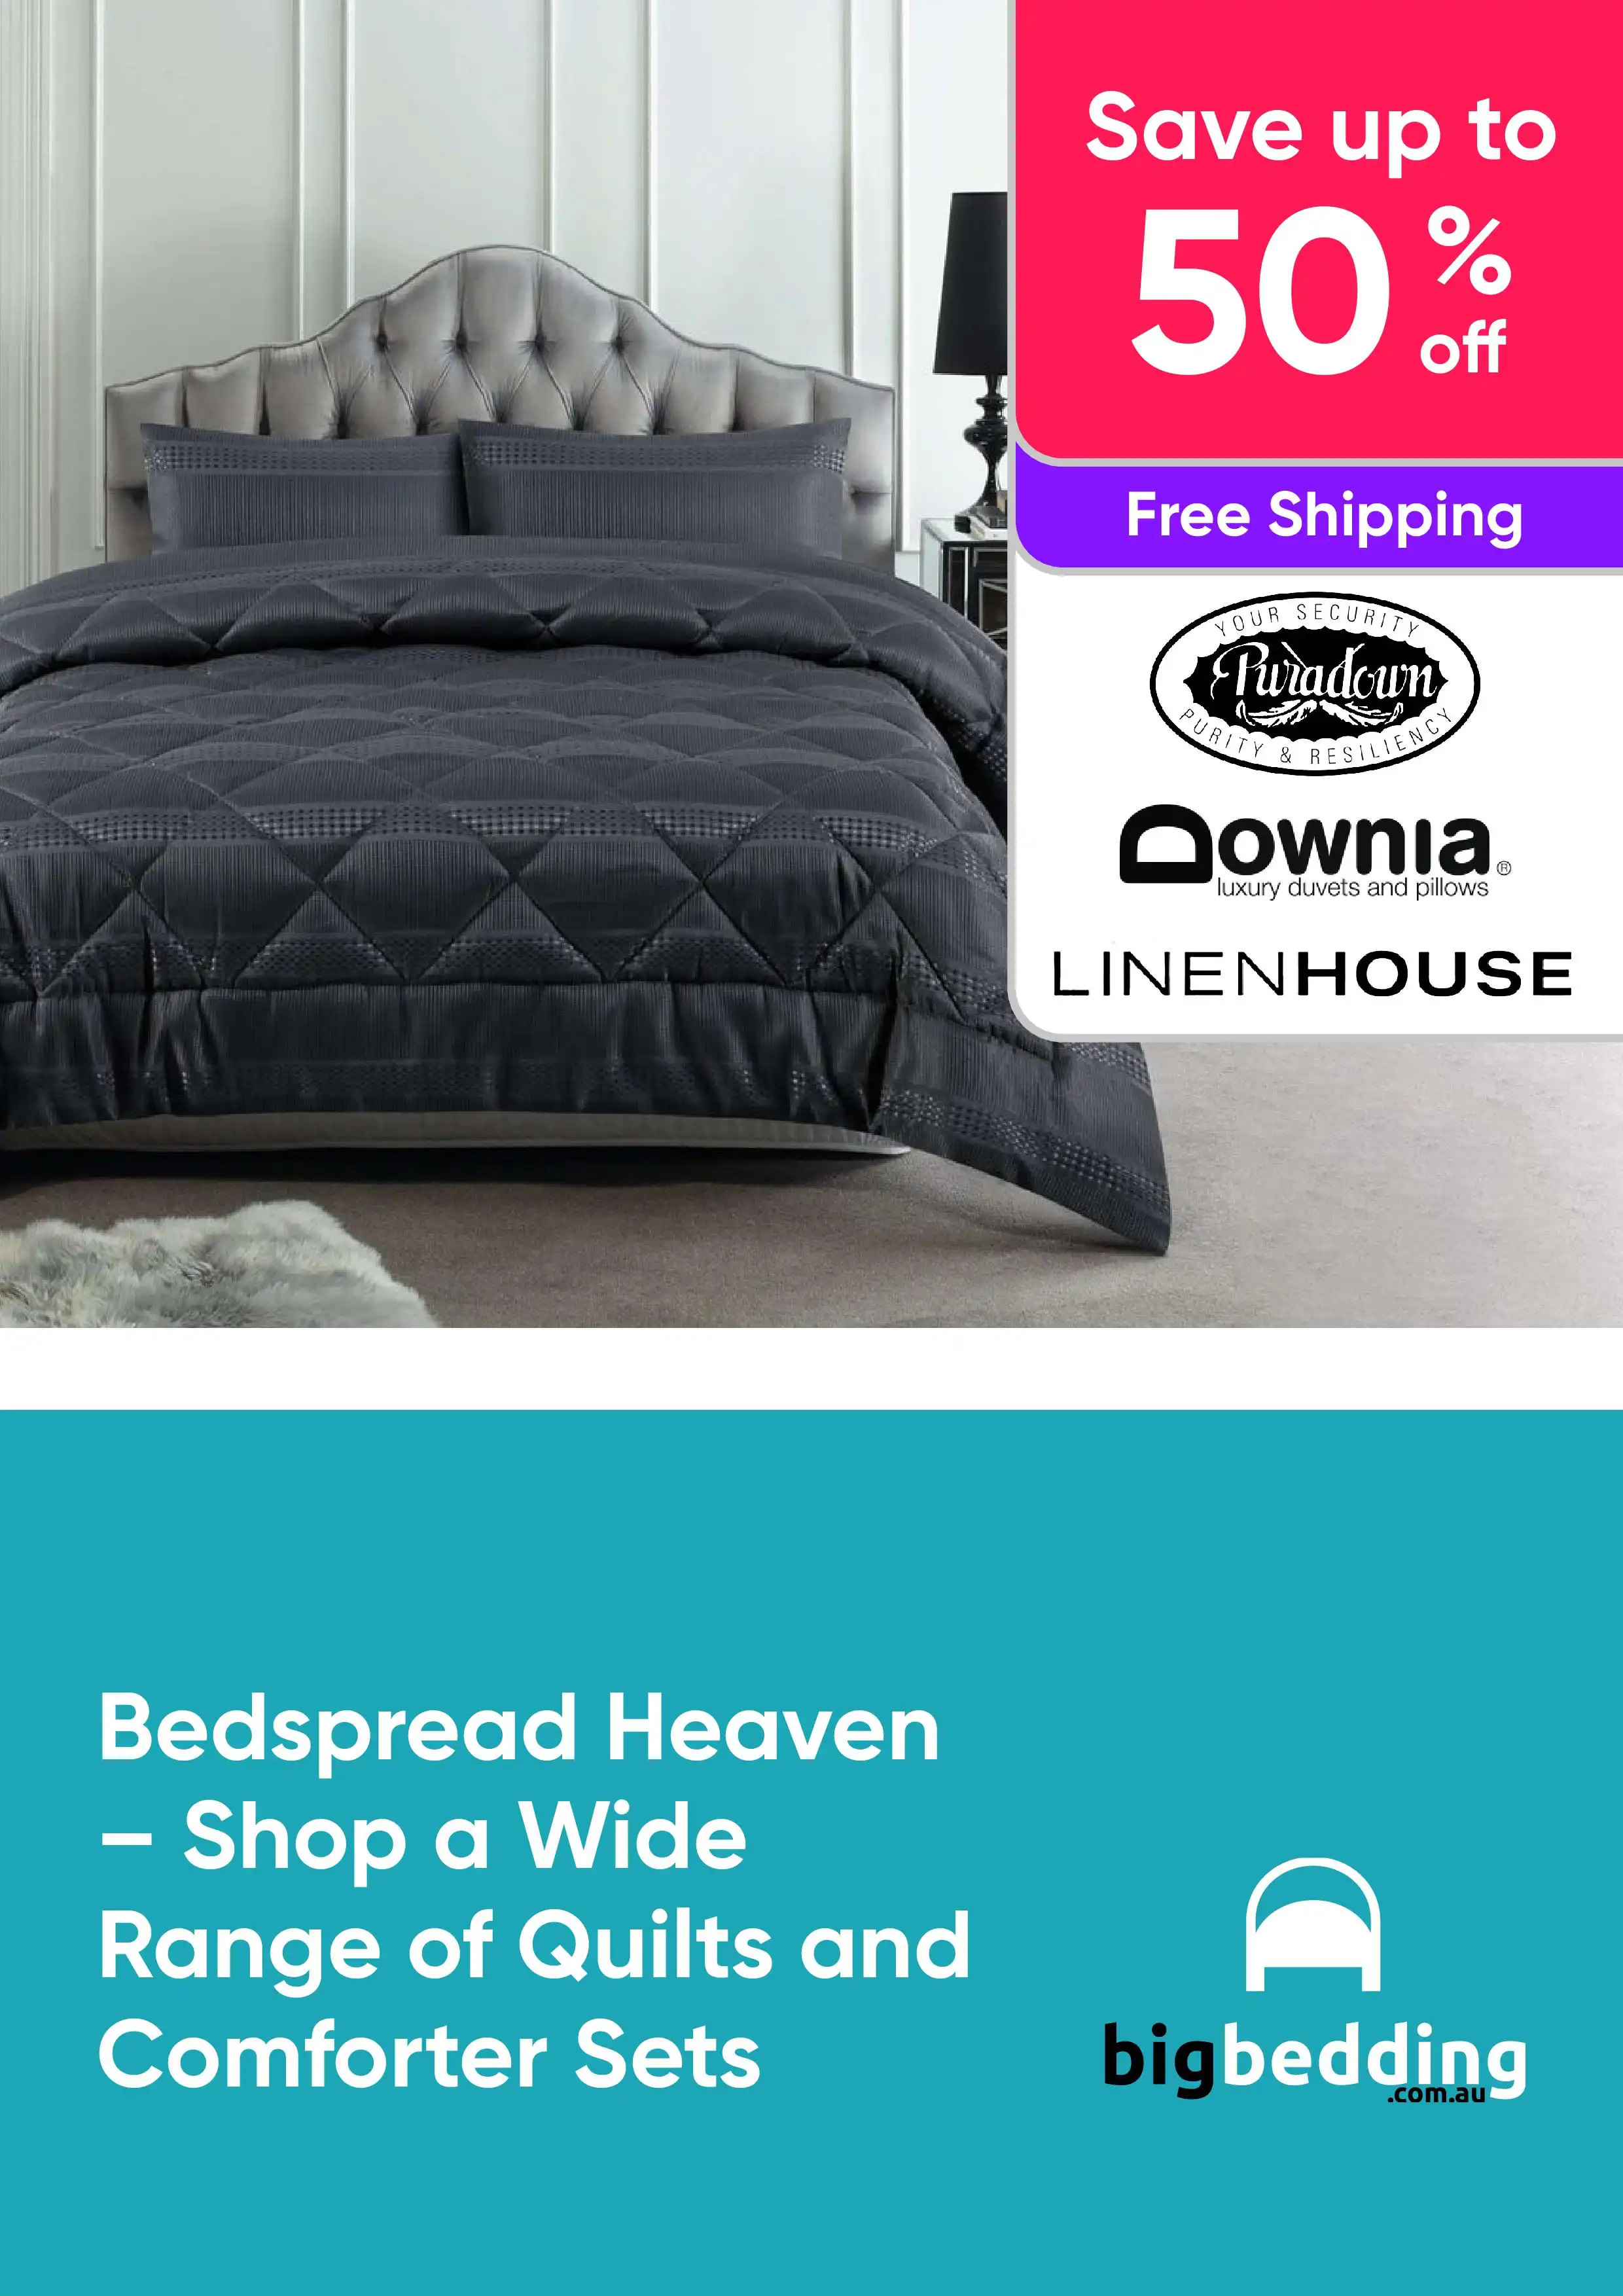 Bedspread Heaven - Save Up To 50% Off a Wide Range of Quilts and Comforter Sets